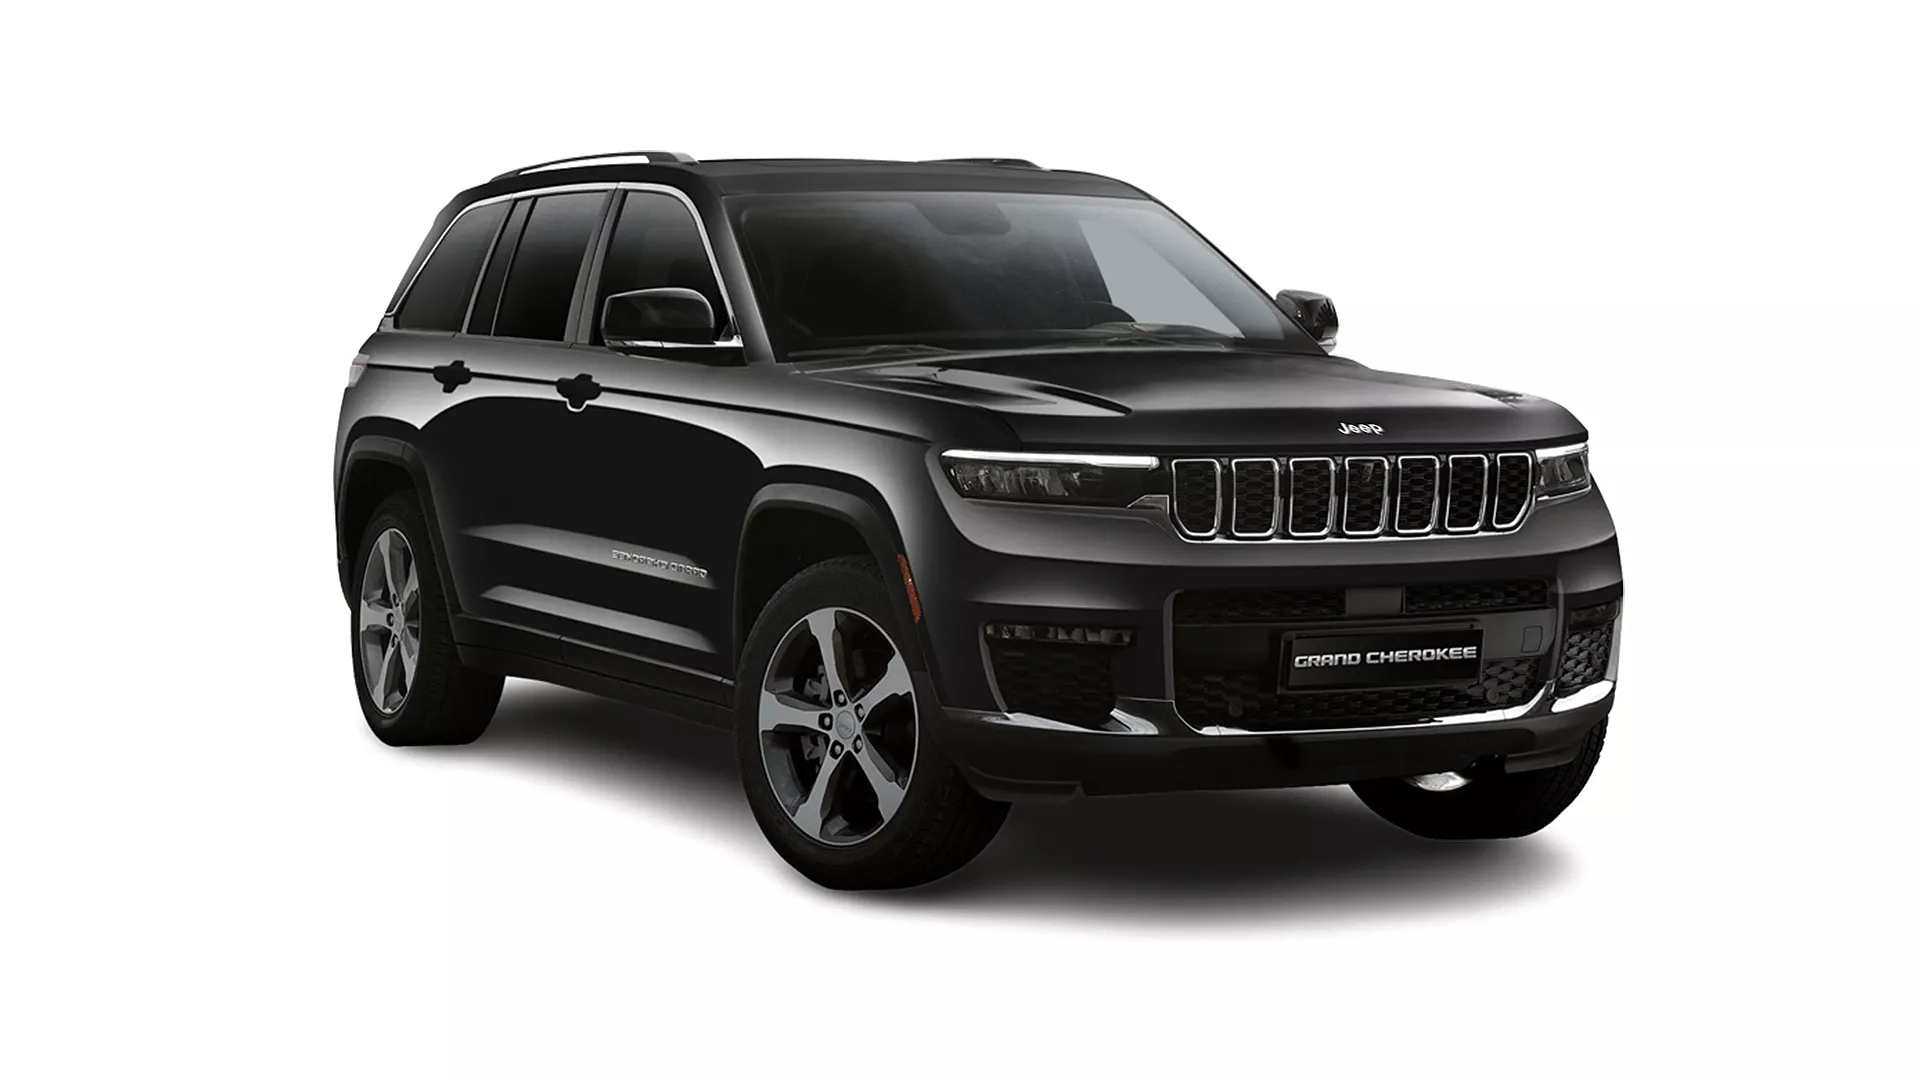 Recall Issued for Over 338,000 Jeep Grand Cherokee SUVs Over Potential Wheel Detachment